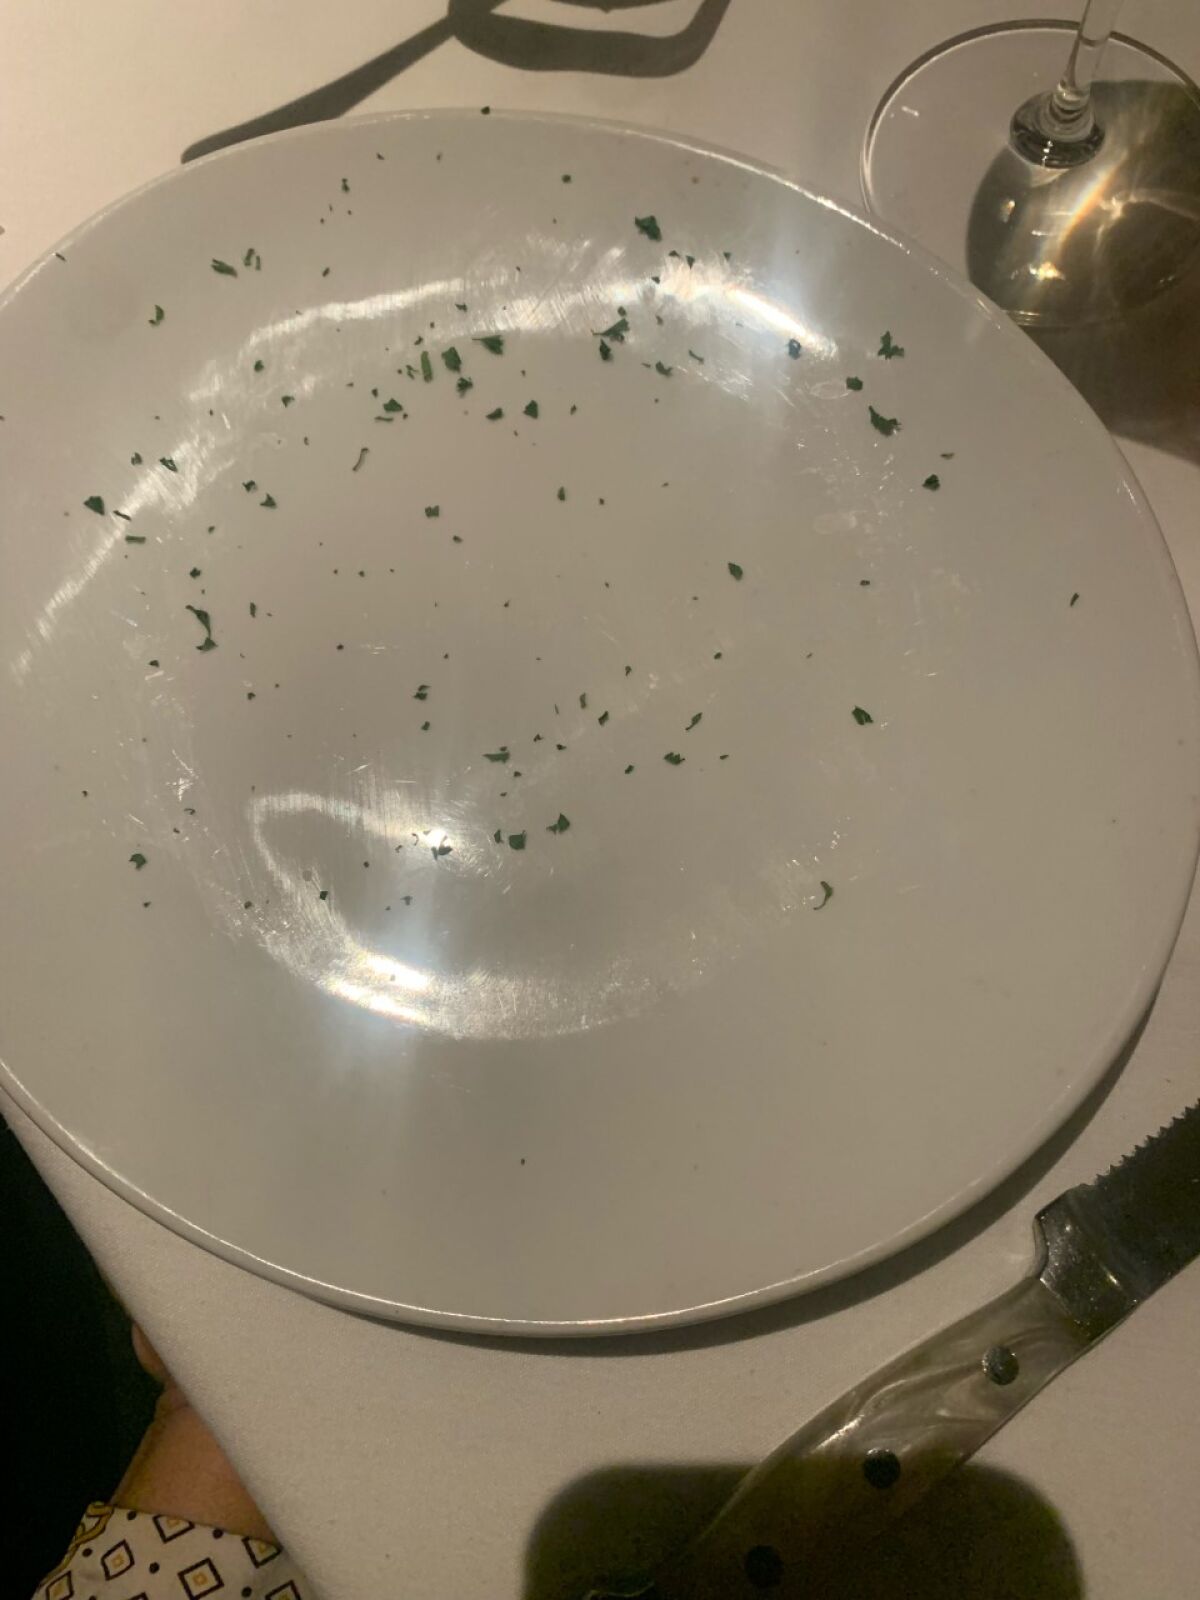 Mychel McKillian's lawsuit says he was served this empty plate at Fleming’s Prime Steakhouse & Wine Bar in La Jolla.